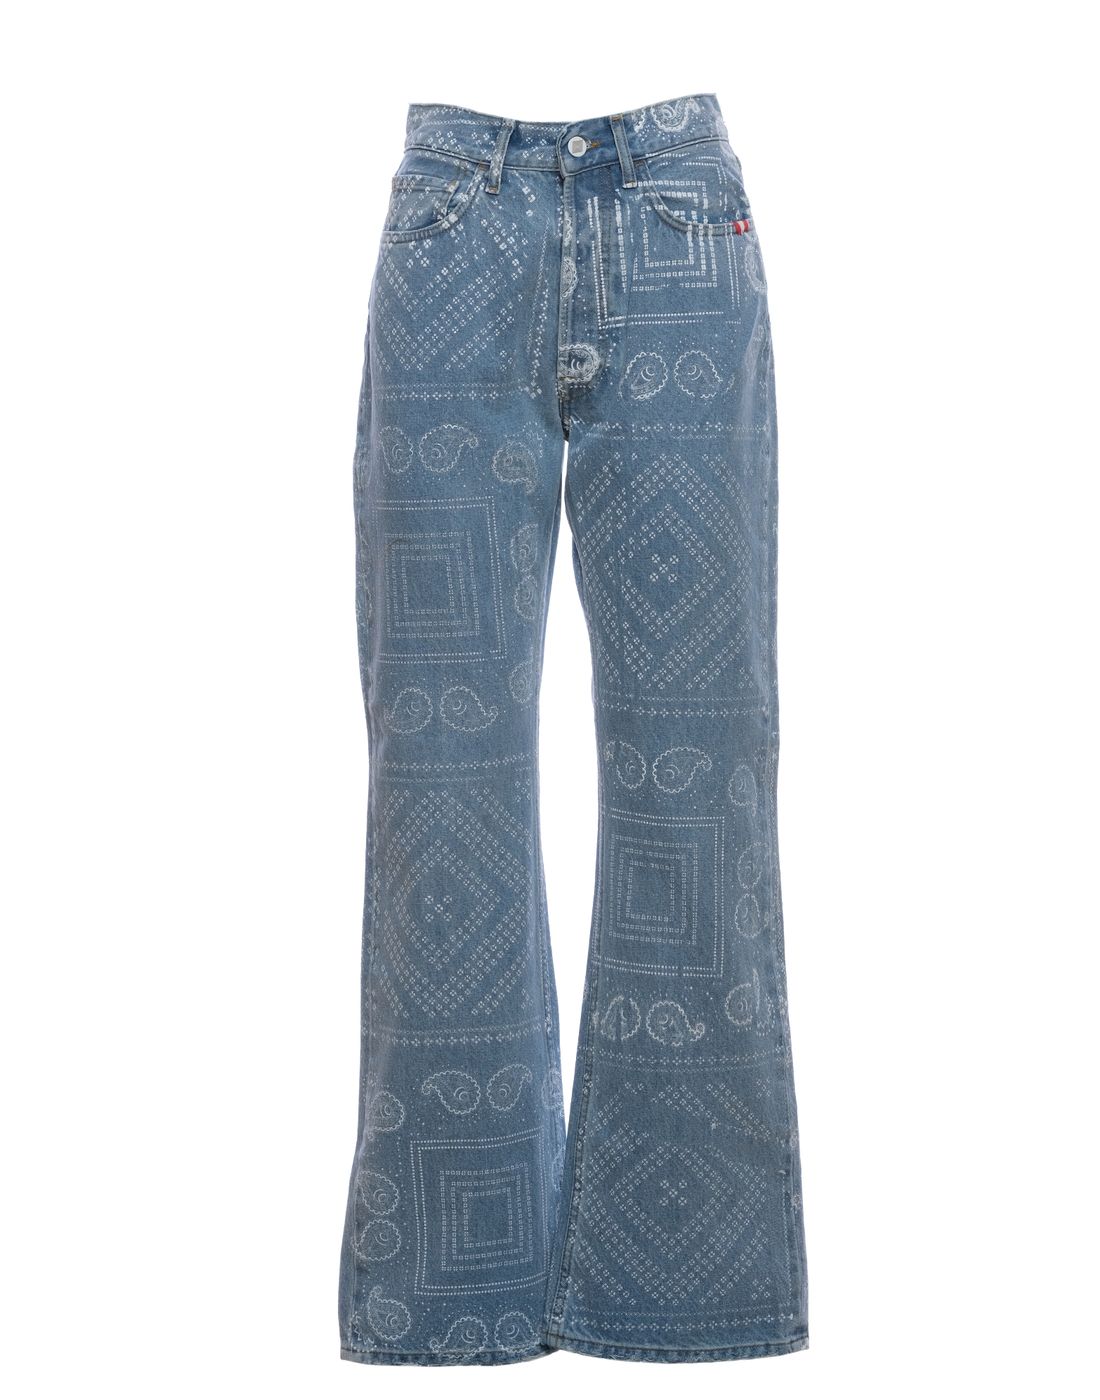 Jeans for woman AMISH P22AMD007D469A018 999